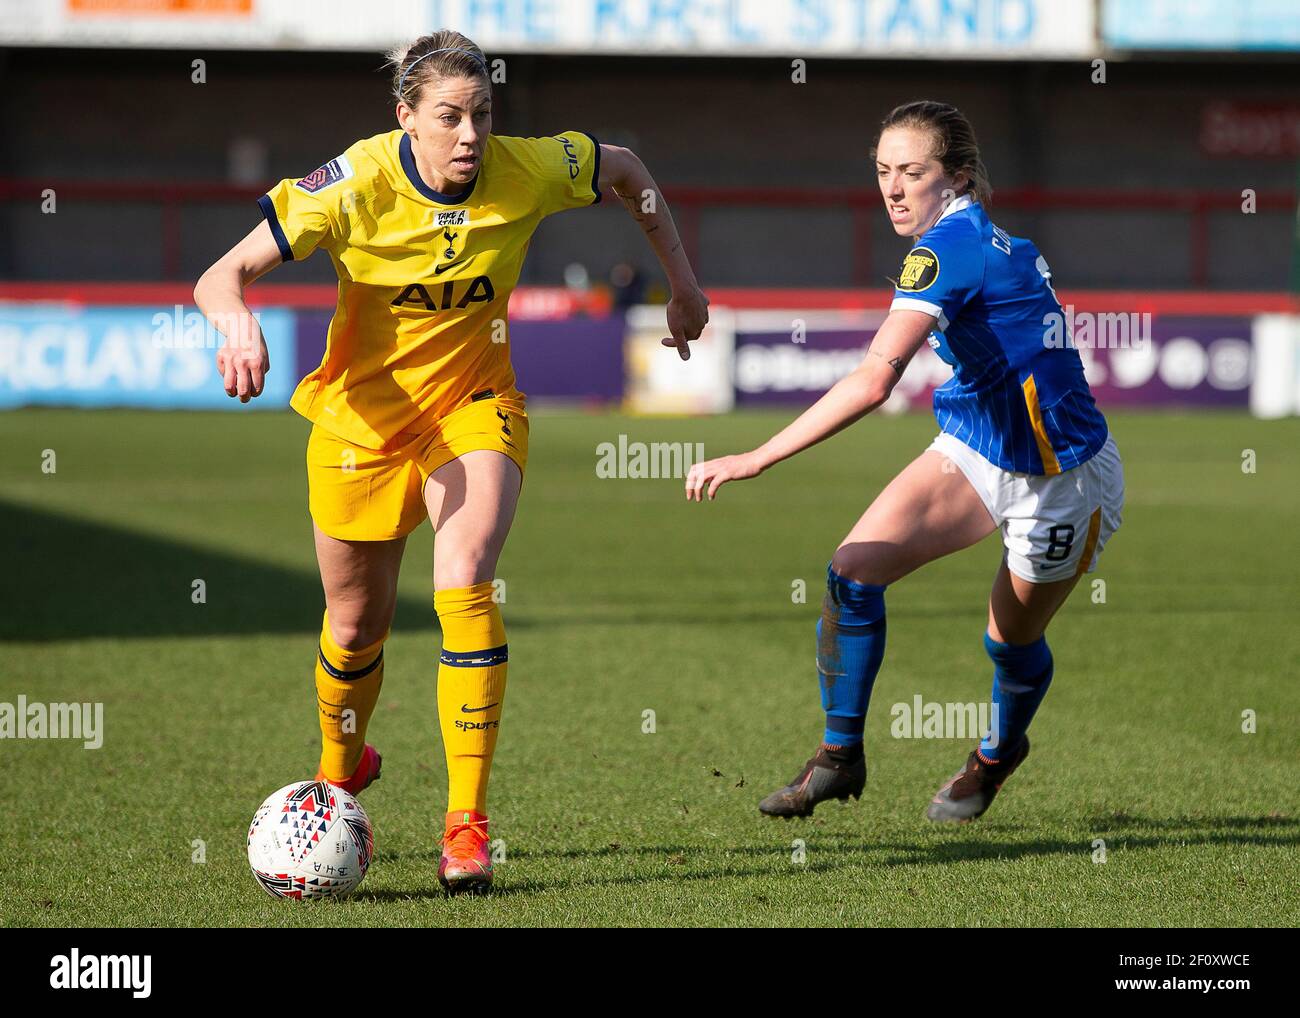 Crawley, UK. 7th March 2021. Alanna Kennedy of Tottenham with the ball ahead of Megan Connolly of Brighton during the FA Women's Super League match between Brighton & Hove Albion Women and Tottenham Hotspur Women at The People's Pension Stadium on March 7th 2021 in Crawley, United Kingdom Stock Photo